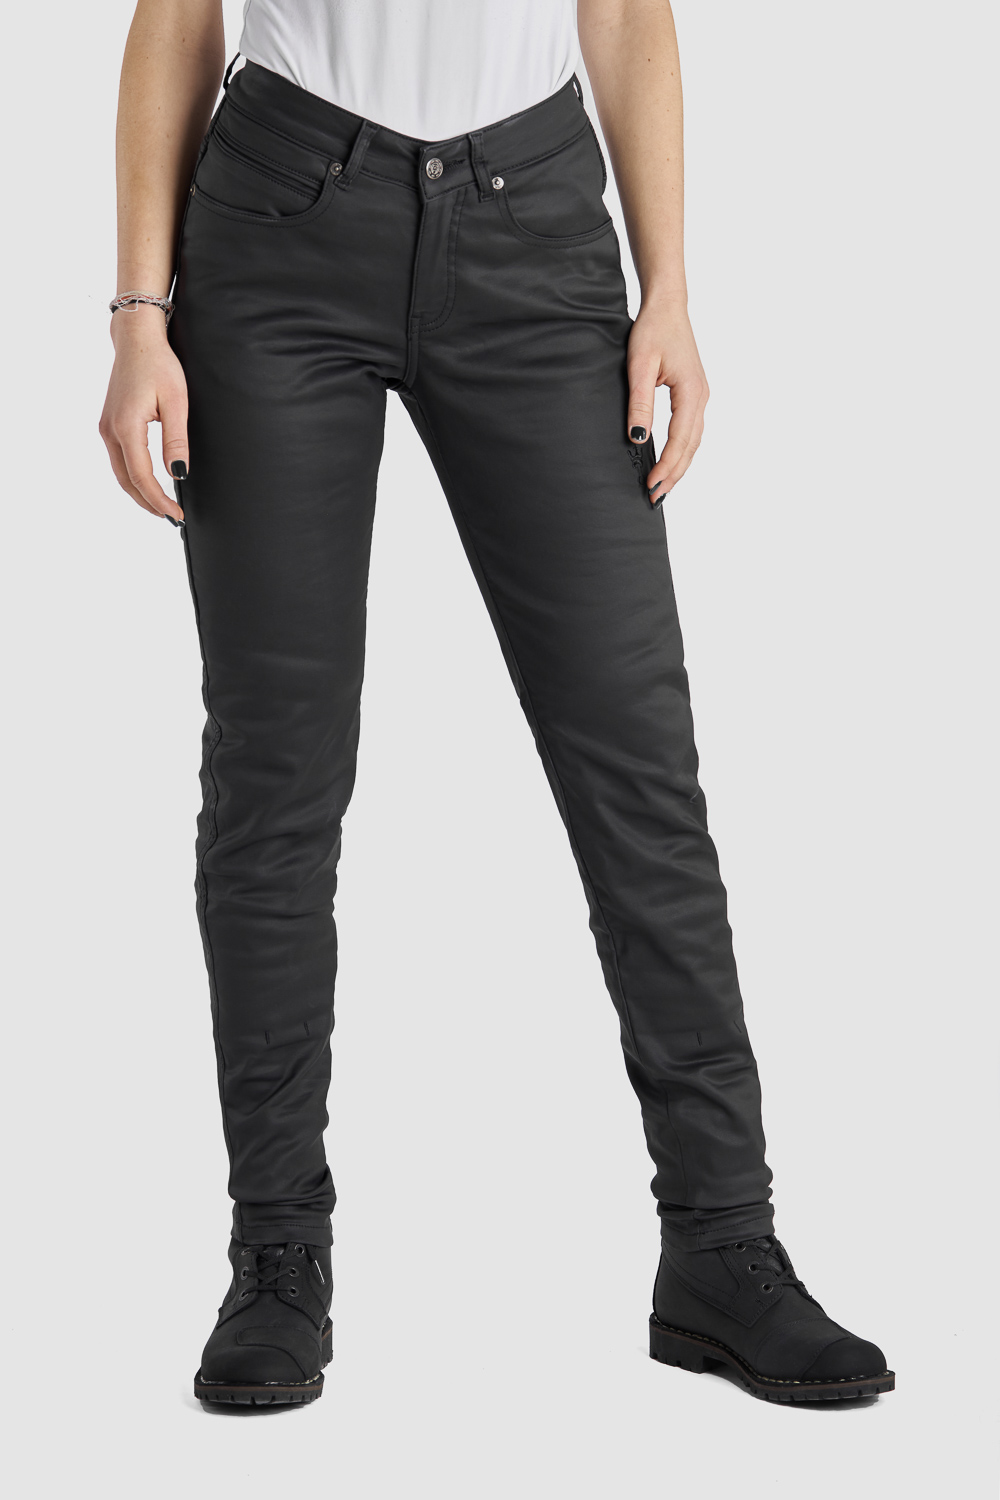 Ladies stretch Denim Motorbike high Jeans lined with DuPont™ Kevlar® CE armor 